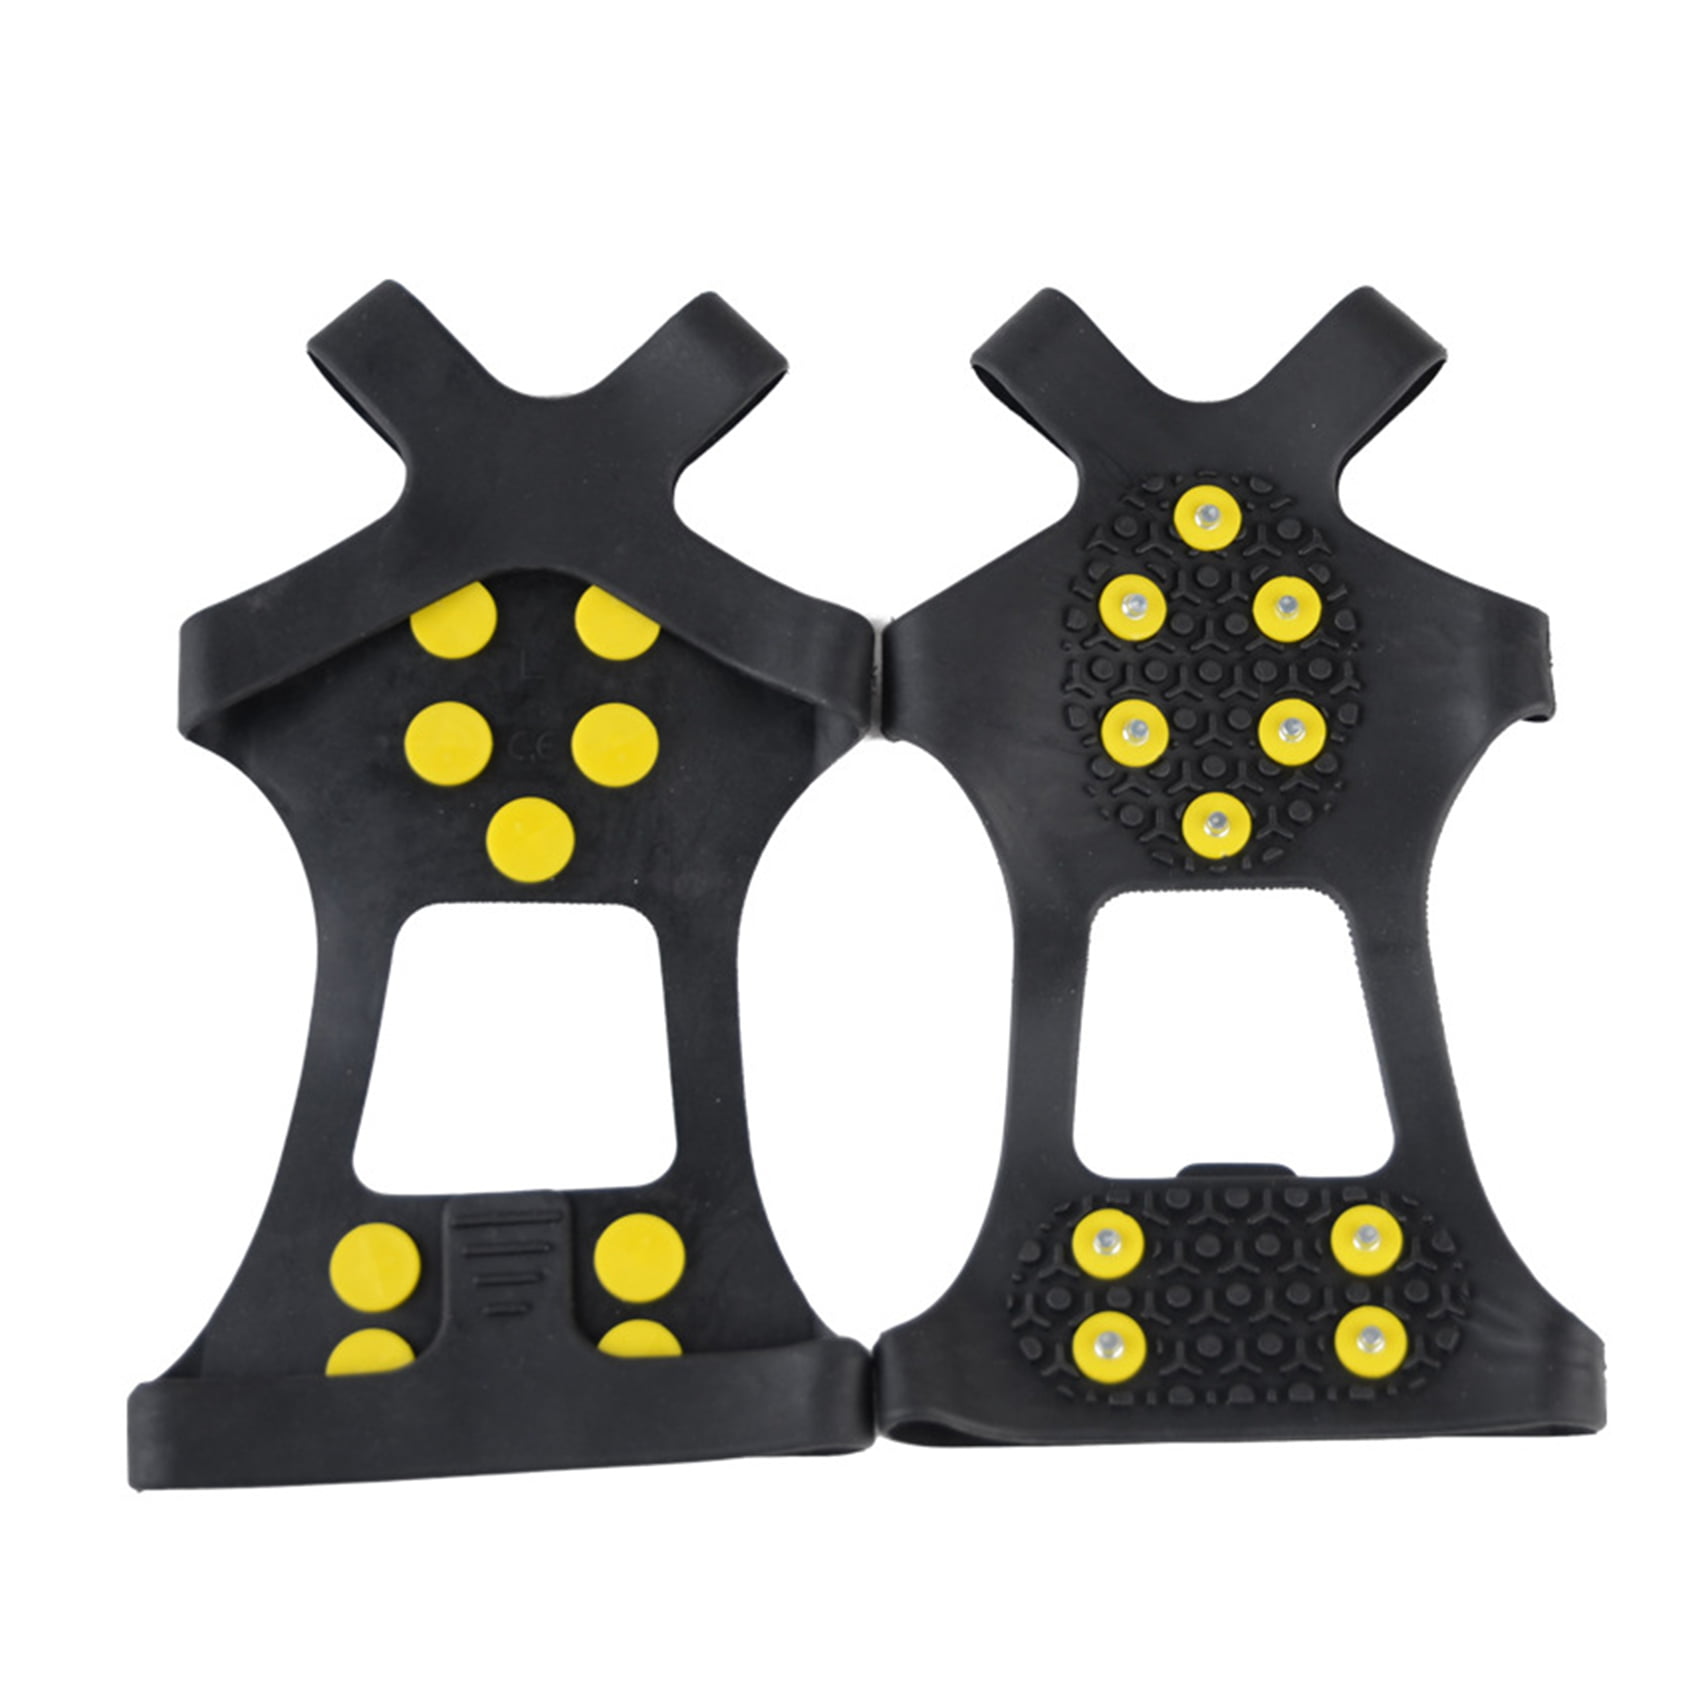 10-Stud Anti-Slip Ice Snow Shoe Spike Grips Cleats Covers Crampons Winter Sport 